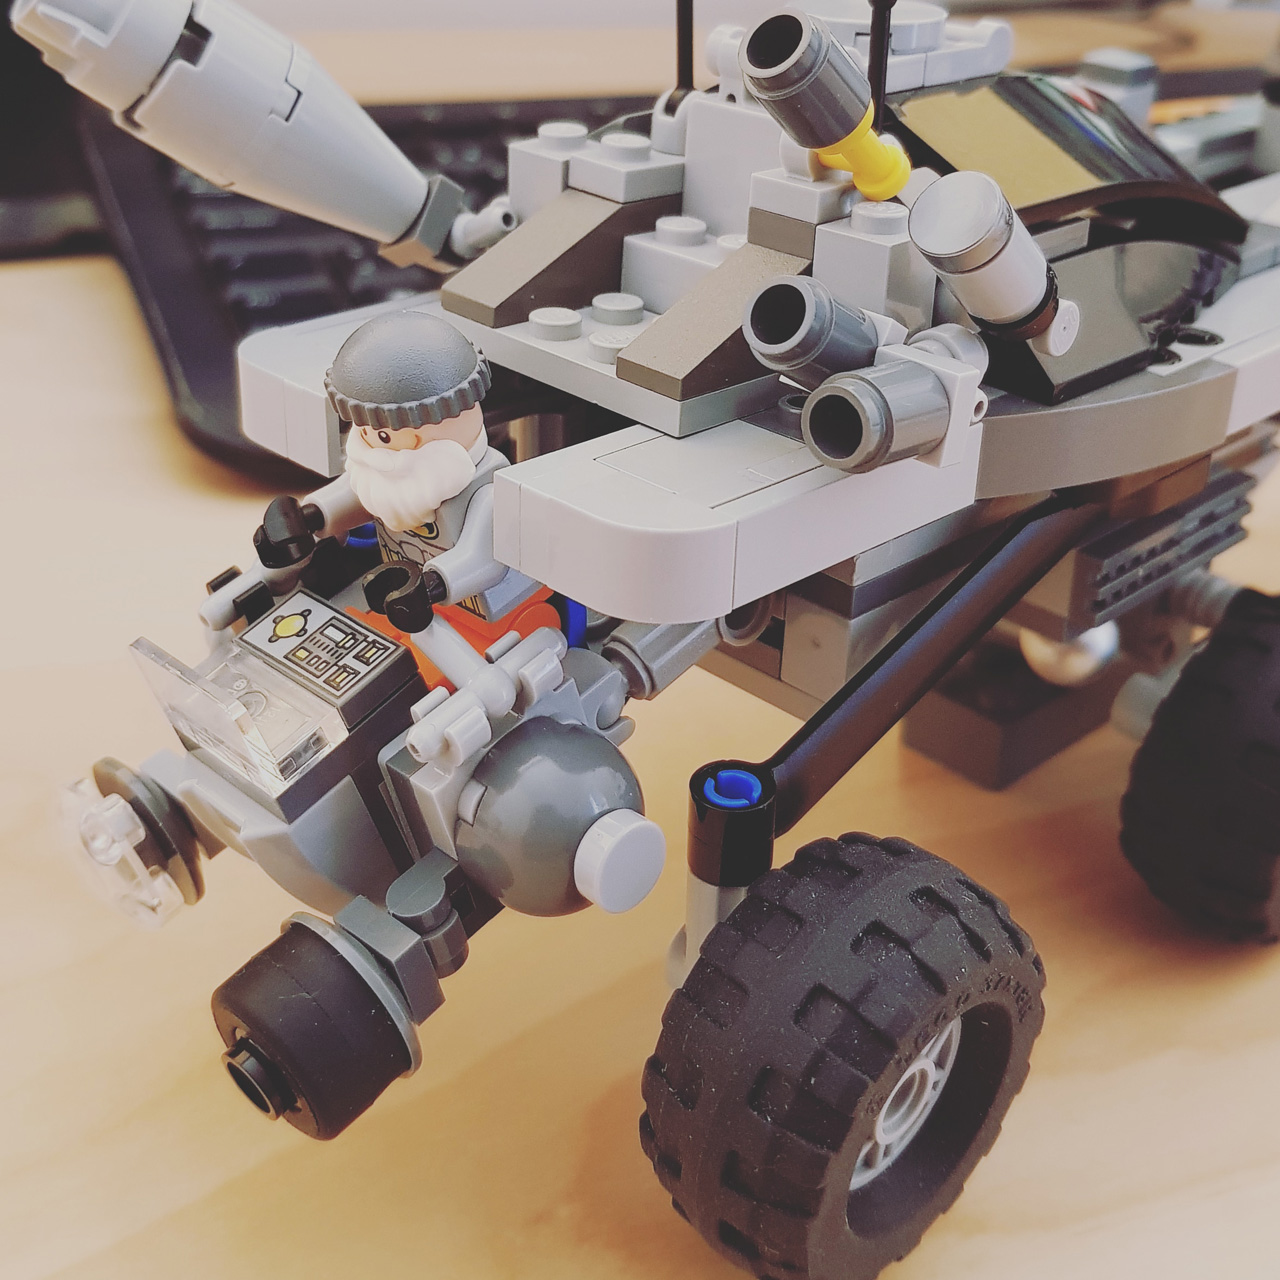 Space Rover Challenge. 2001: A Space Legodyssey